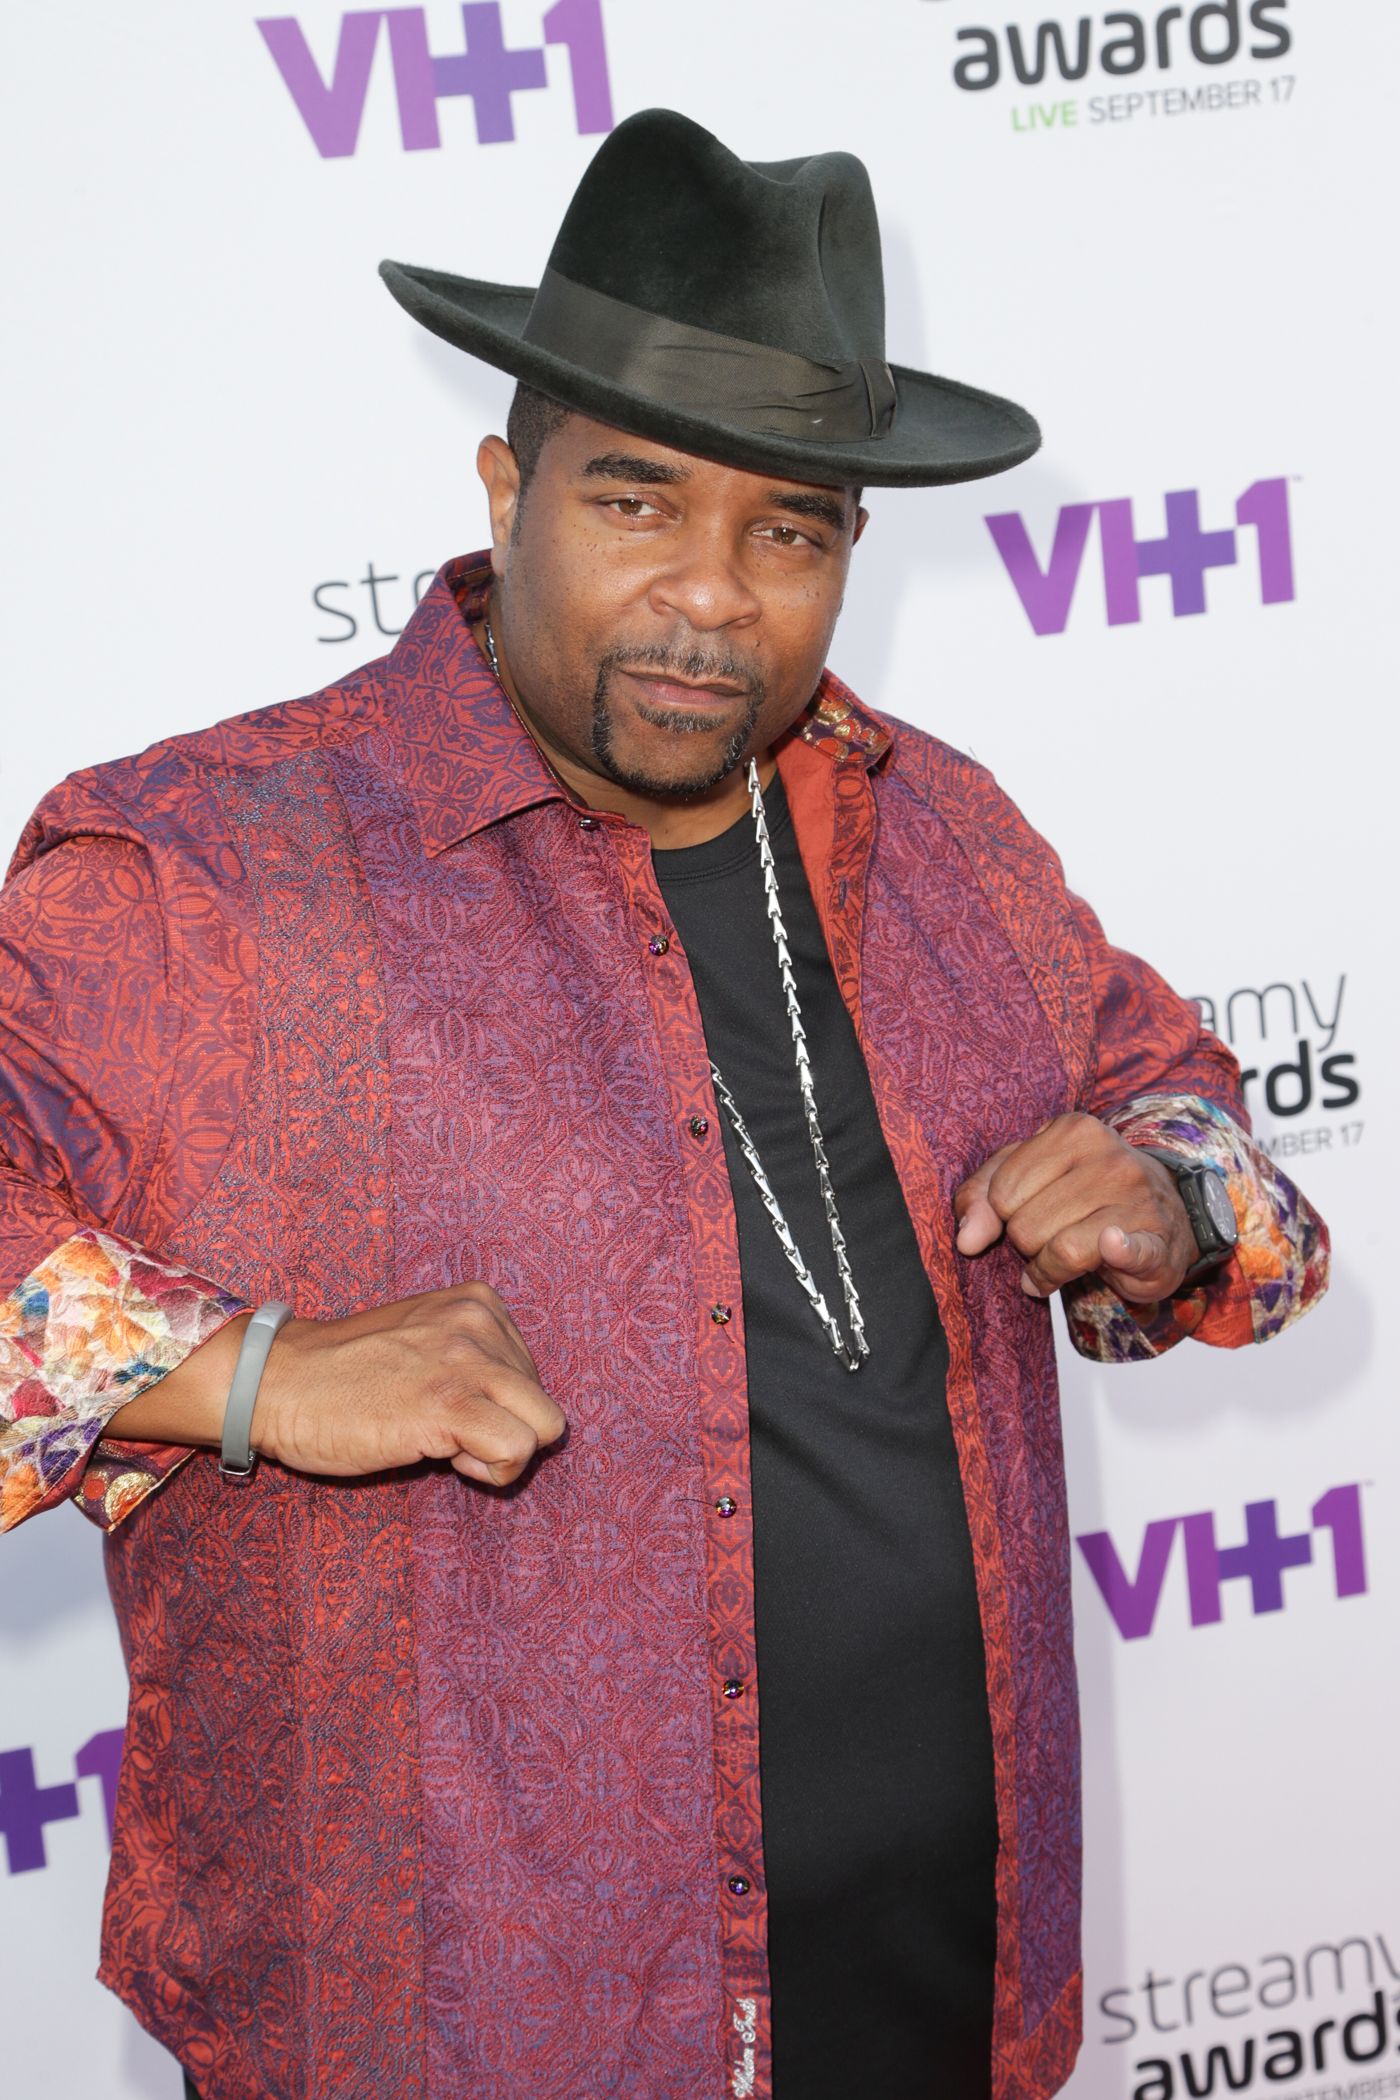 Sir Mix-A-Lot at the Streamy Awards